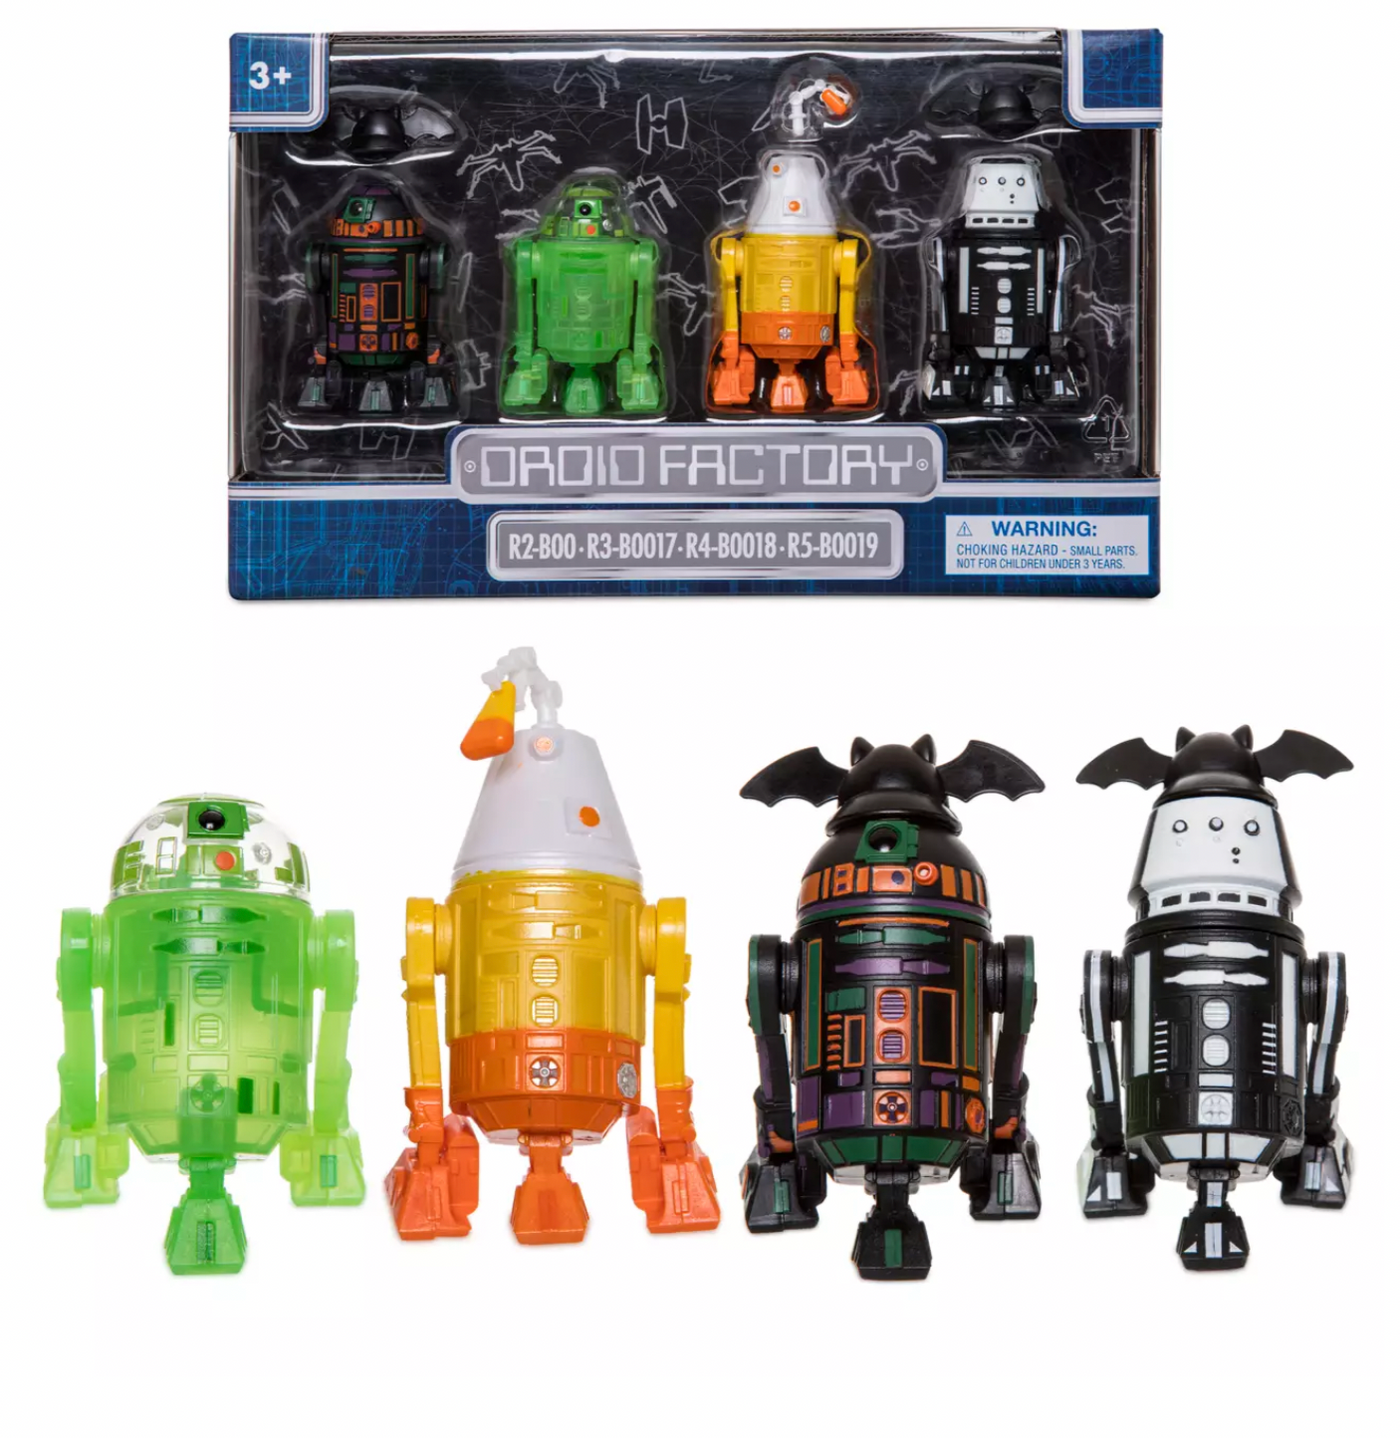 Disney Parks Star Wars Halloween Glow Droid Factory Figure Set New with Box